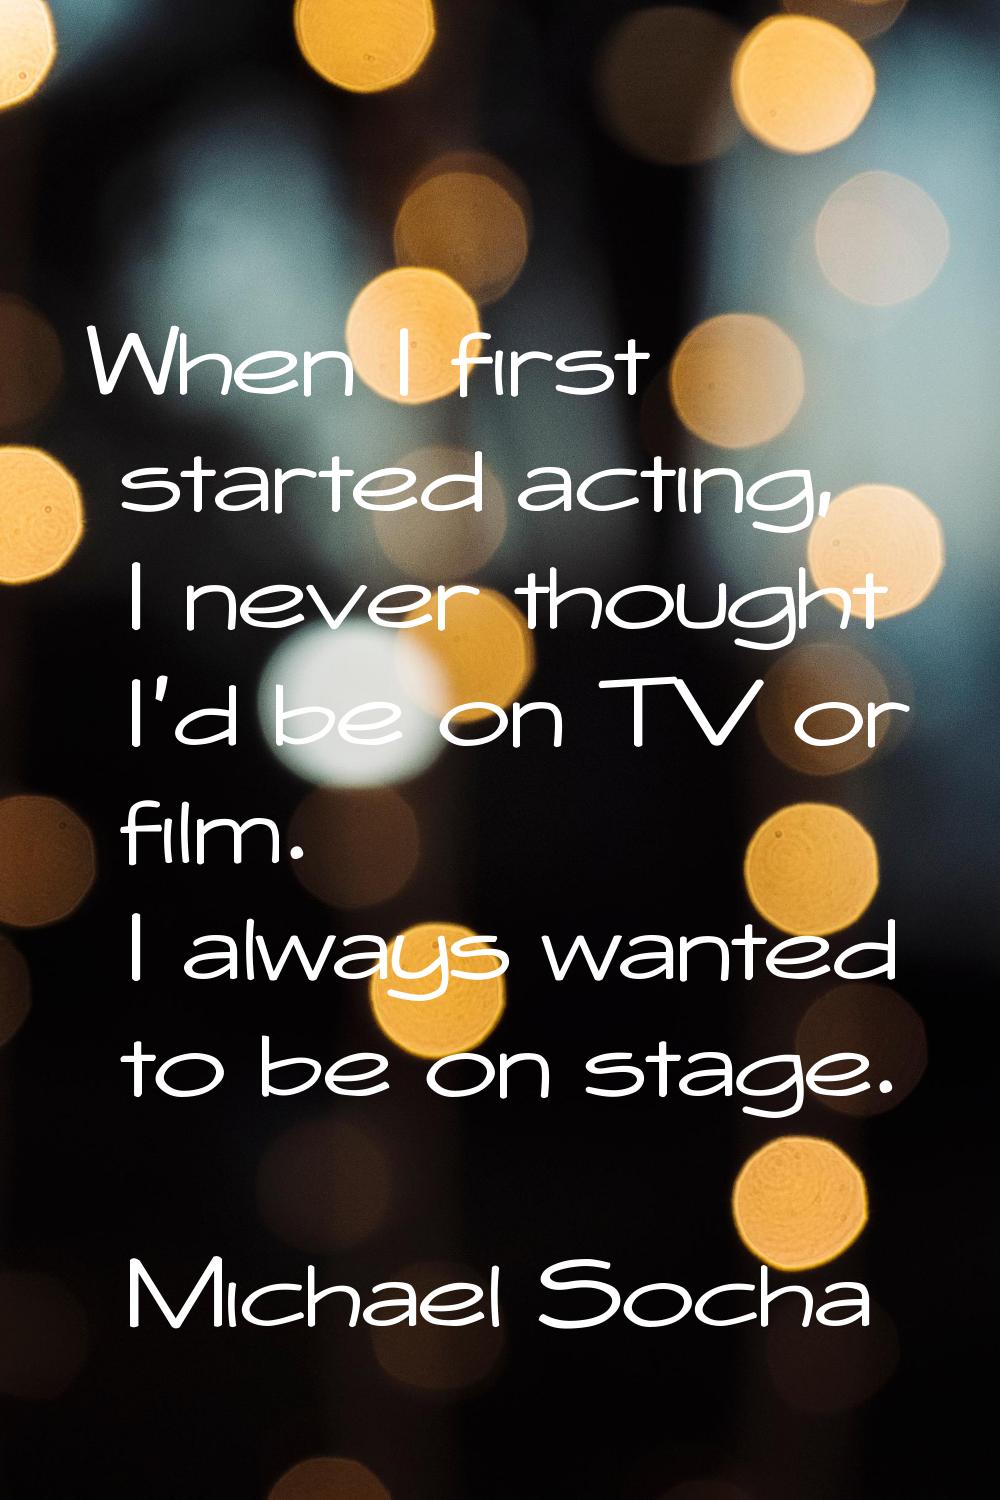 When I first started acting, I never thought I'd be on TV or film. I always wanted to be on stage.